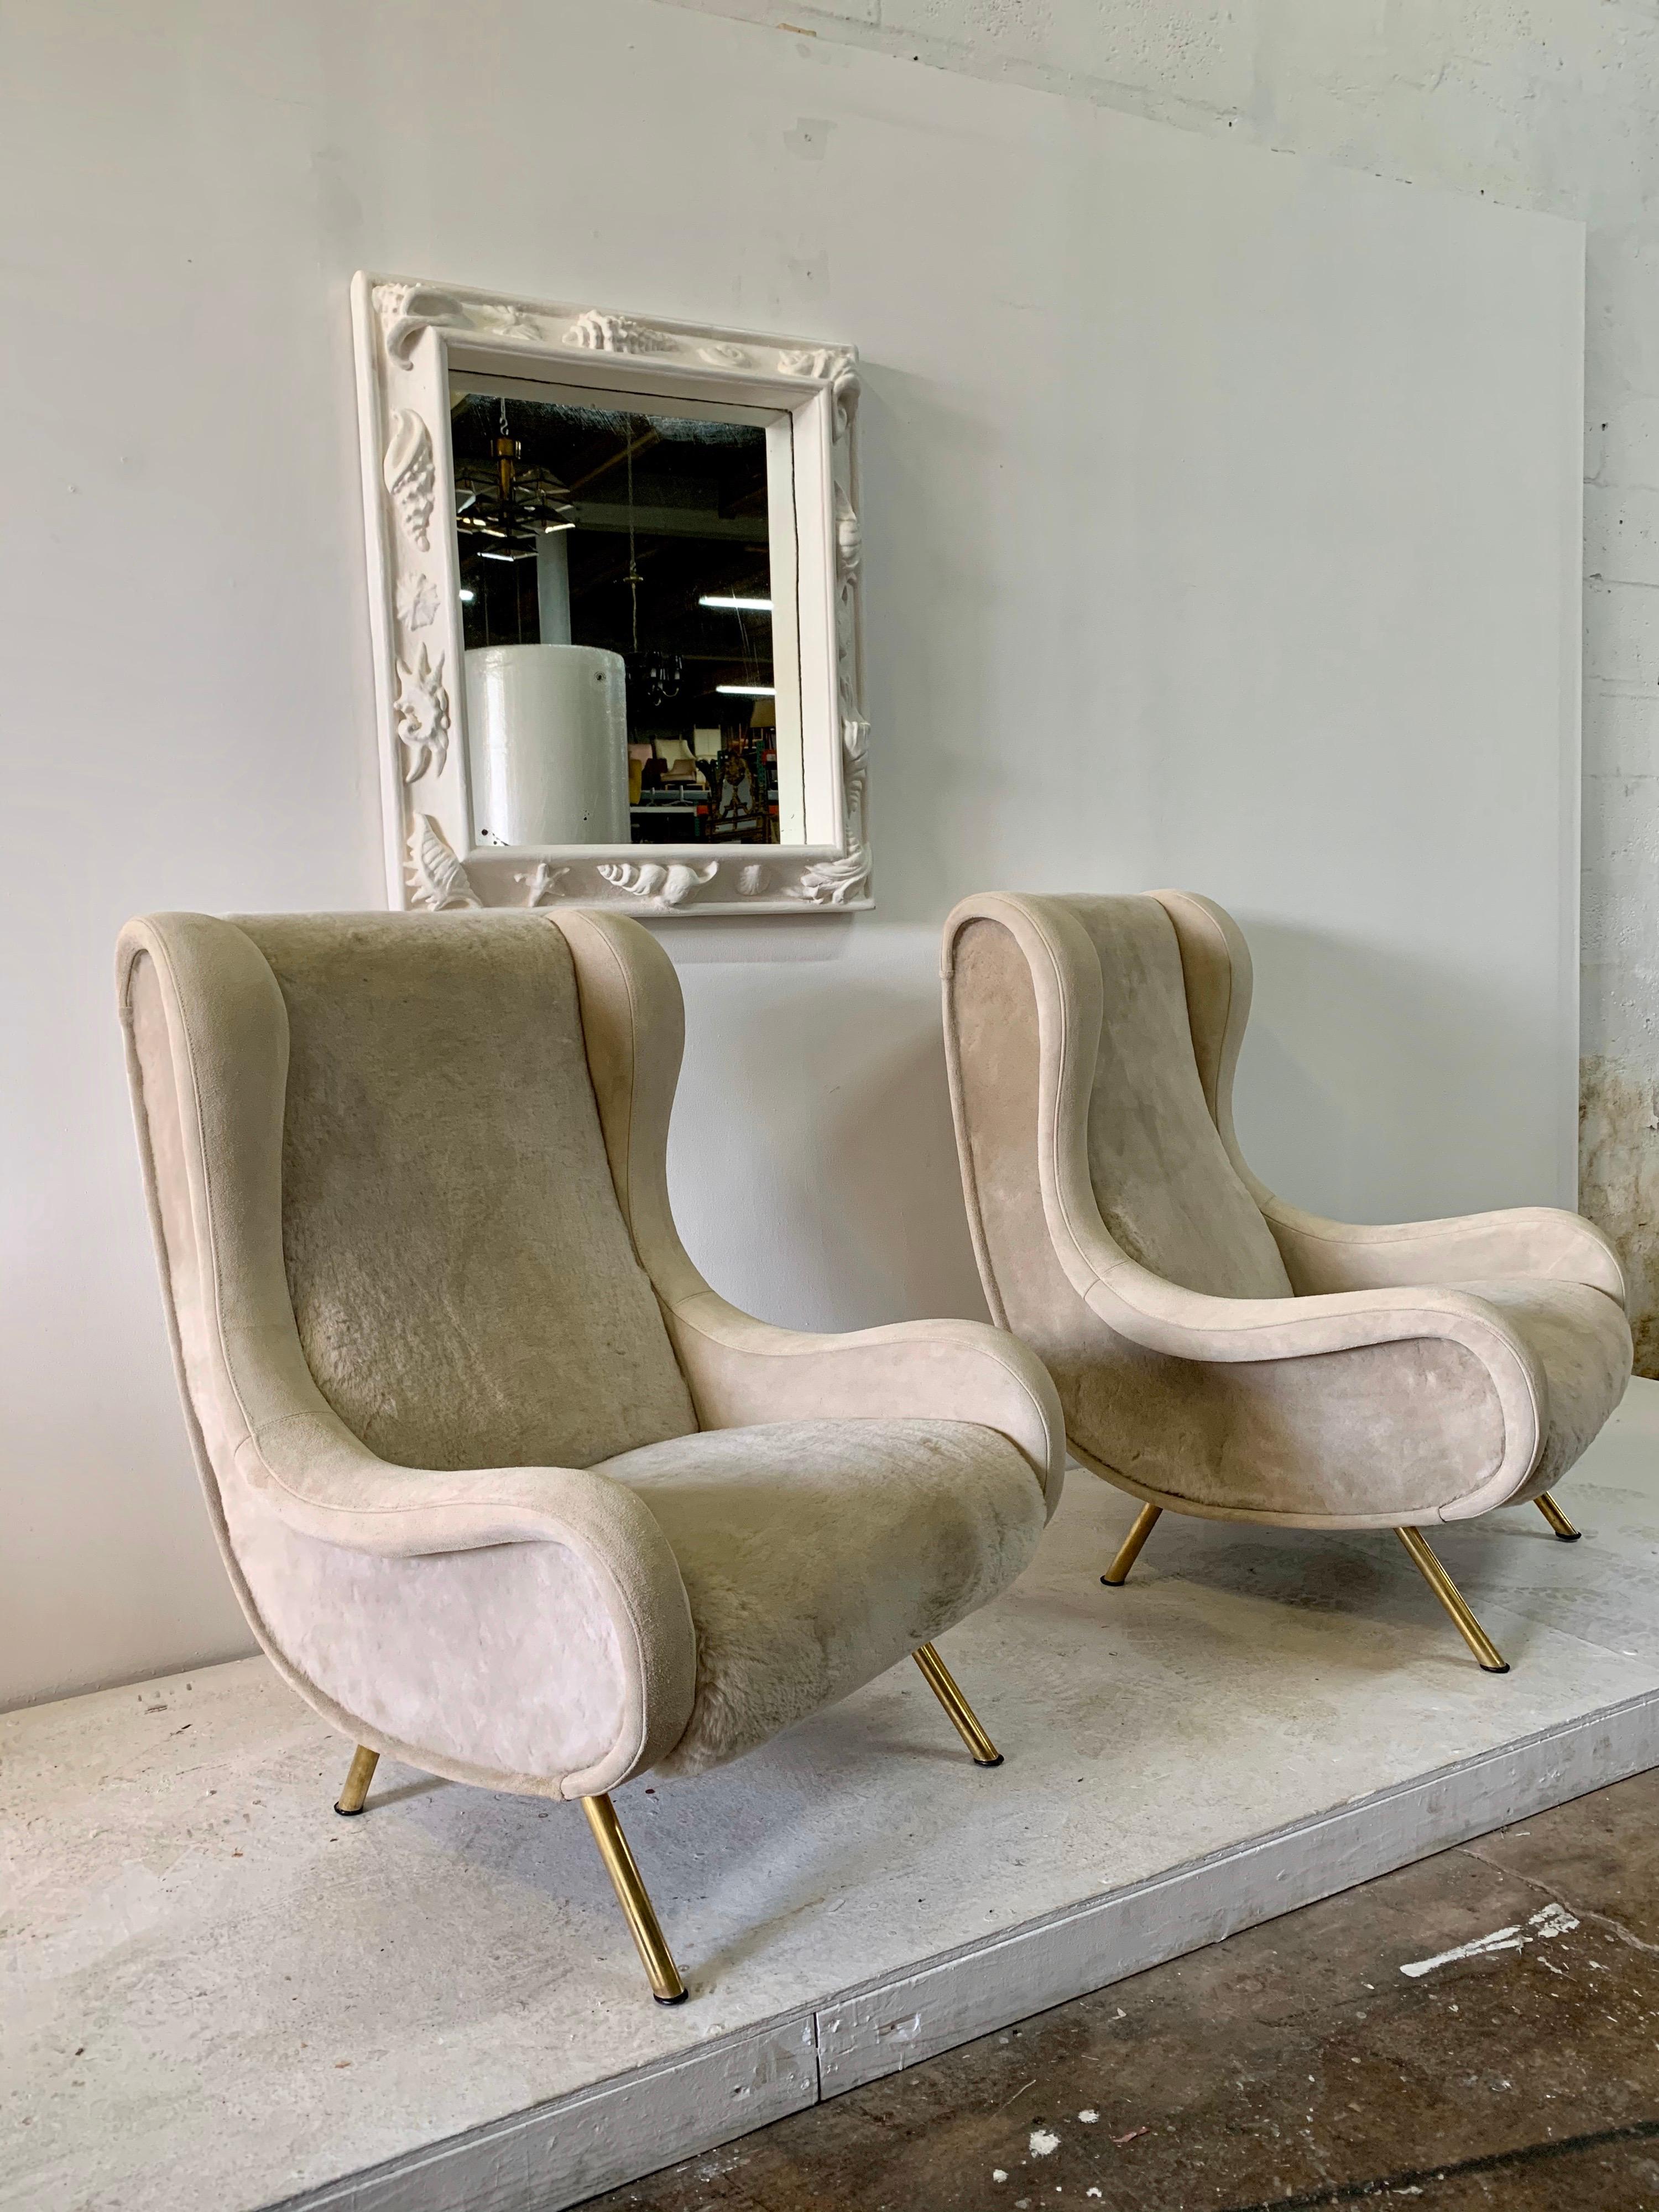 These over-the-top Senior Zanuso armchairs expertly restored and reupholstered in oatmeal toned shearling wool and natural suede accent and trim. Retaining original Arflex label, made in Spain in the 1960s. Wide and beyond comfortable. Upholstery of